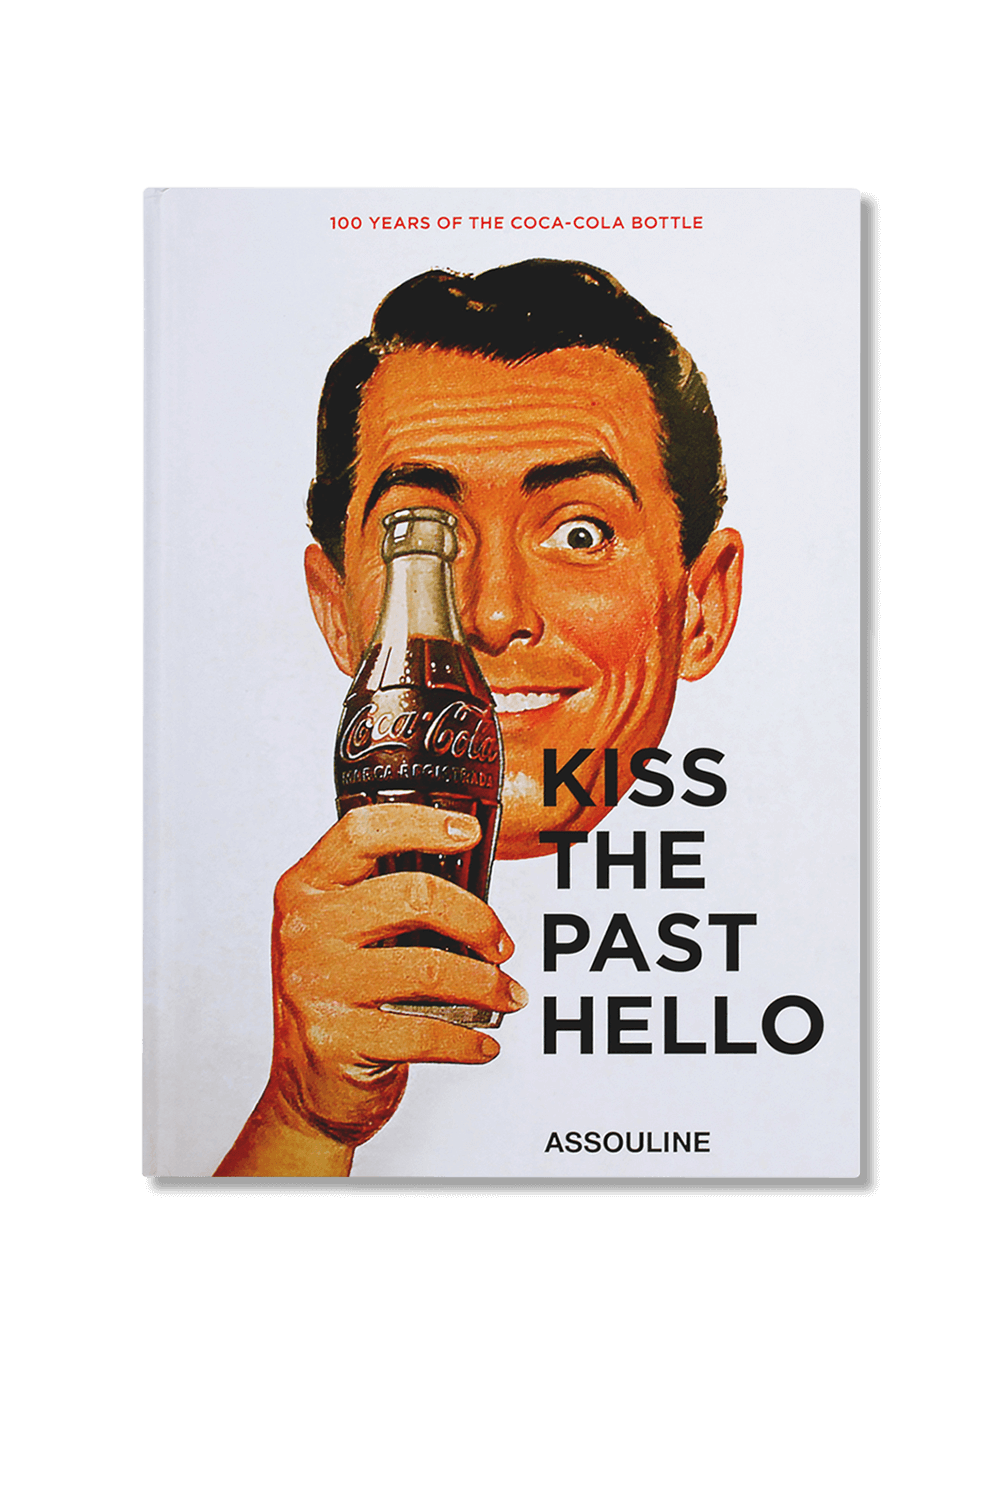 Kiss the Past Hello- 100 Years of the Coca-Cola Contour Bottle ASSOULINE